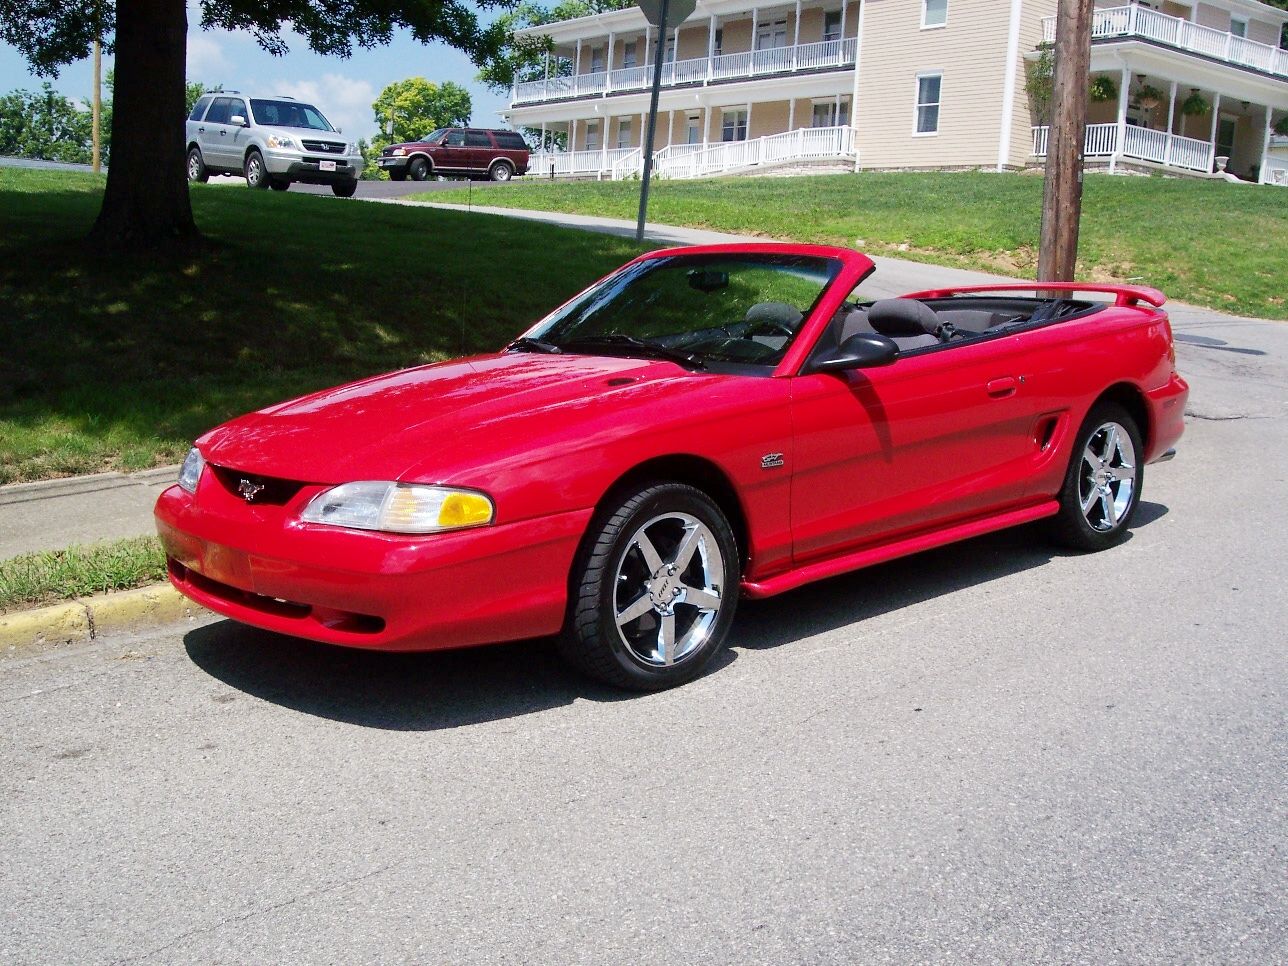 1995 Ford Mustang Gt 0 60 Times Top Speed Specs Quarter Mile And